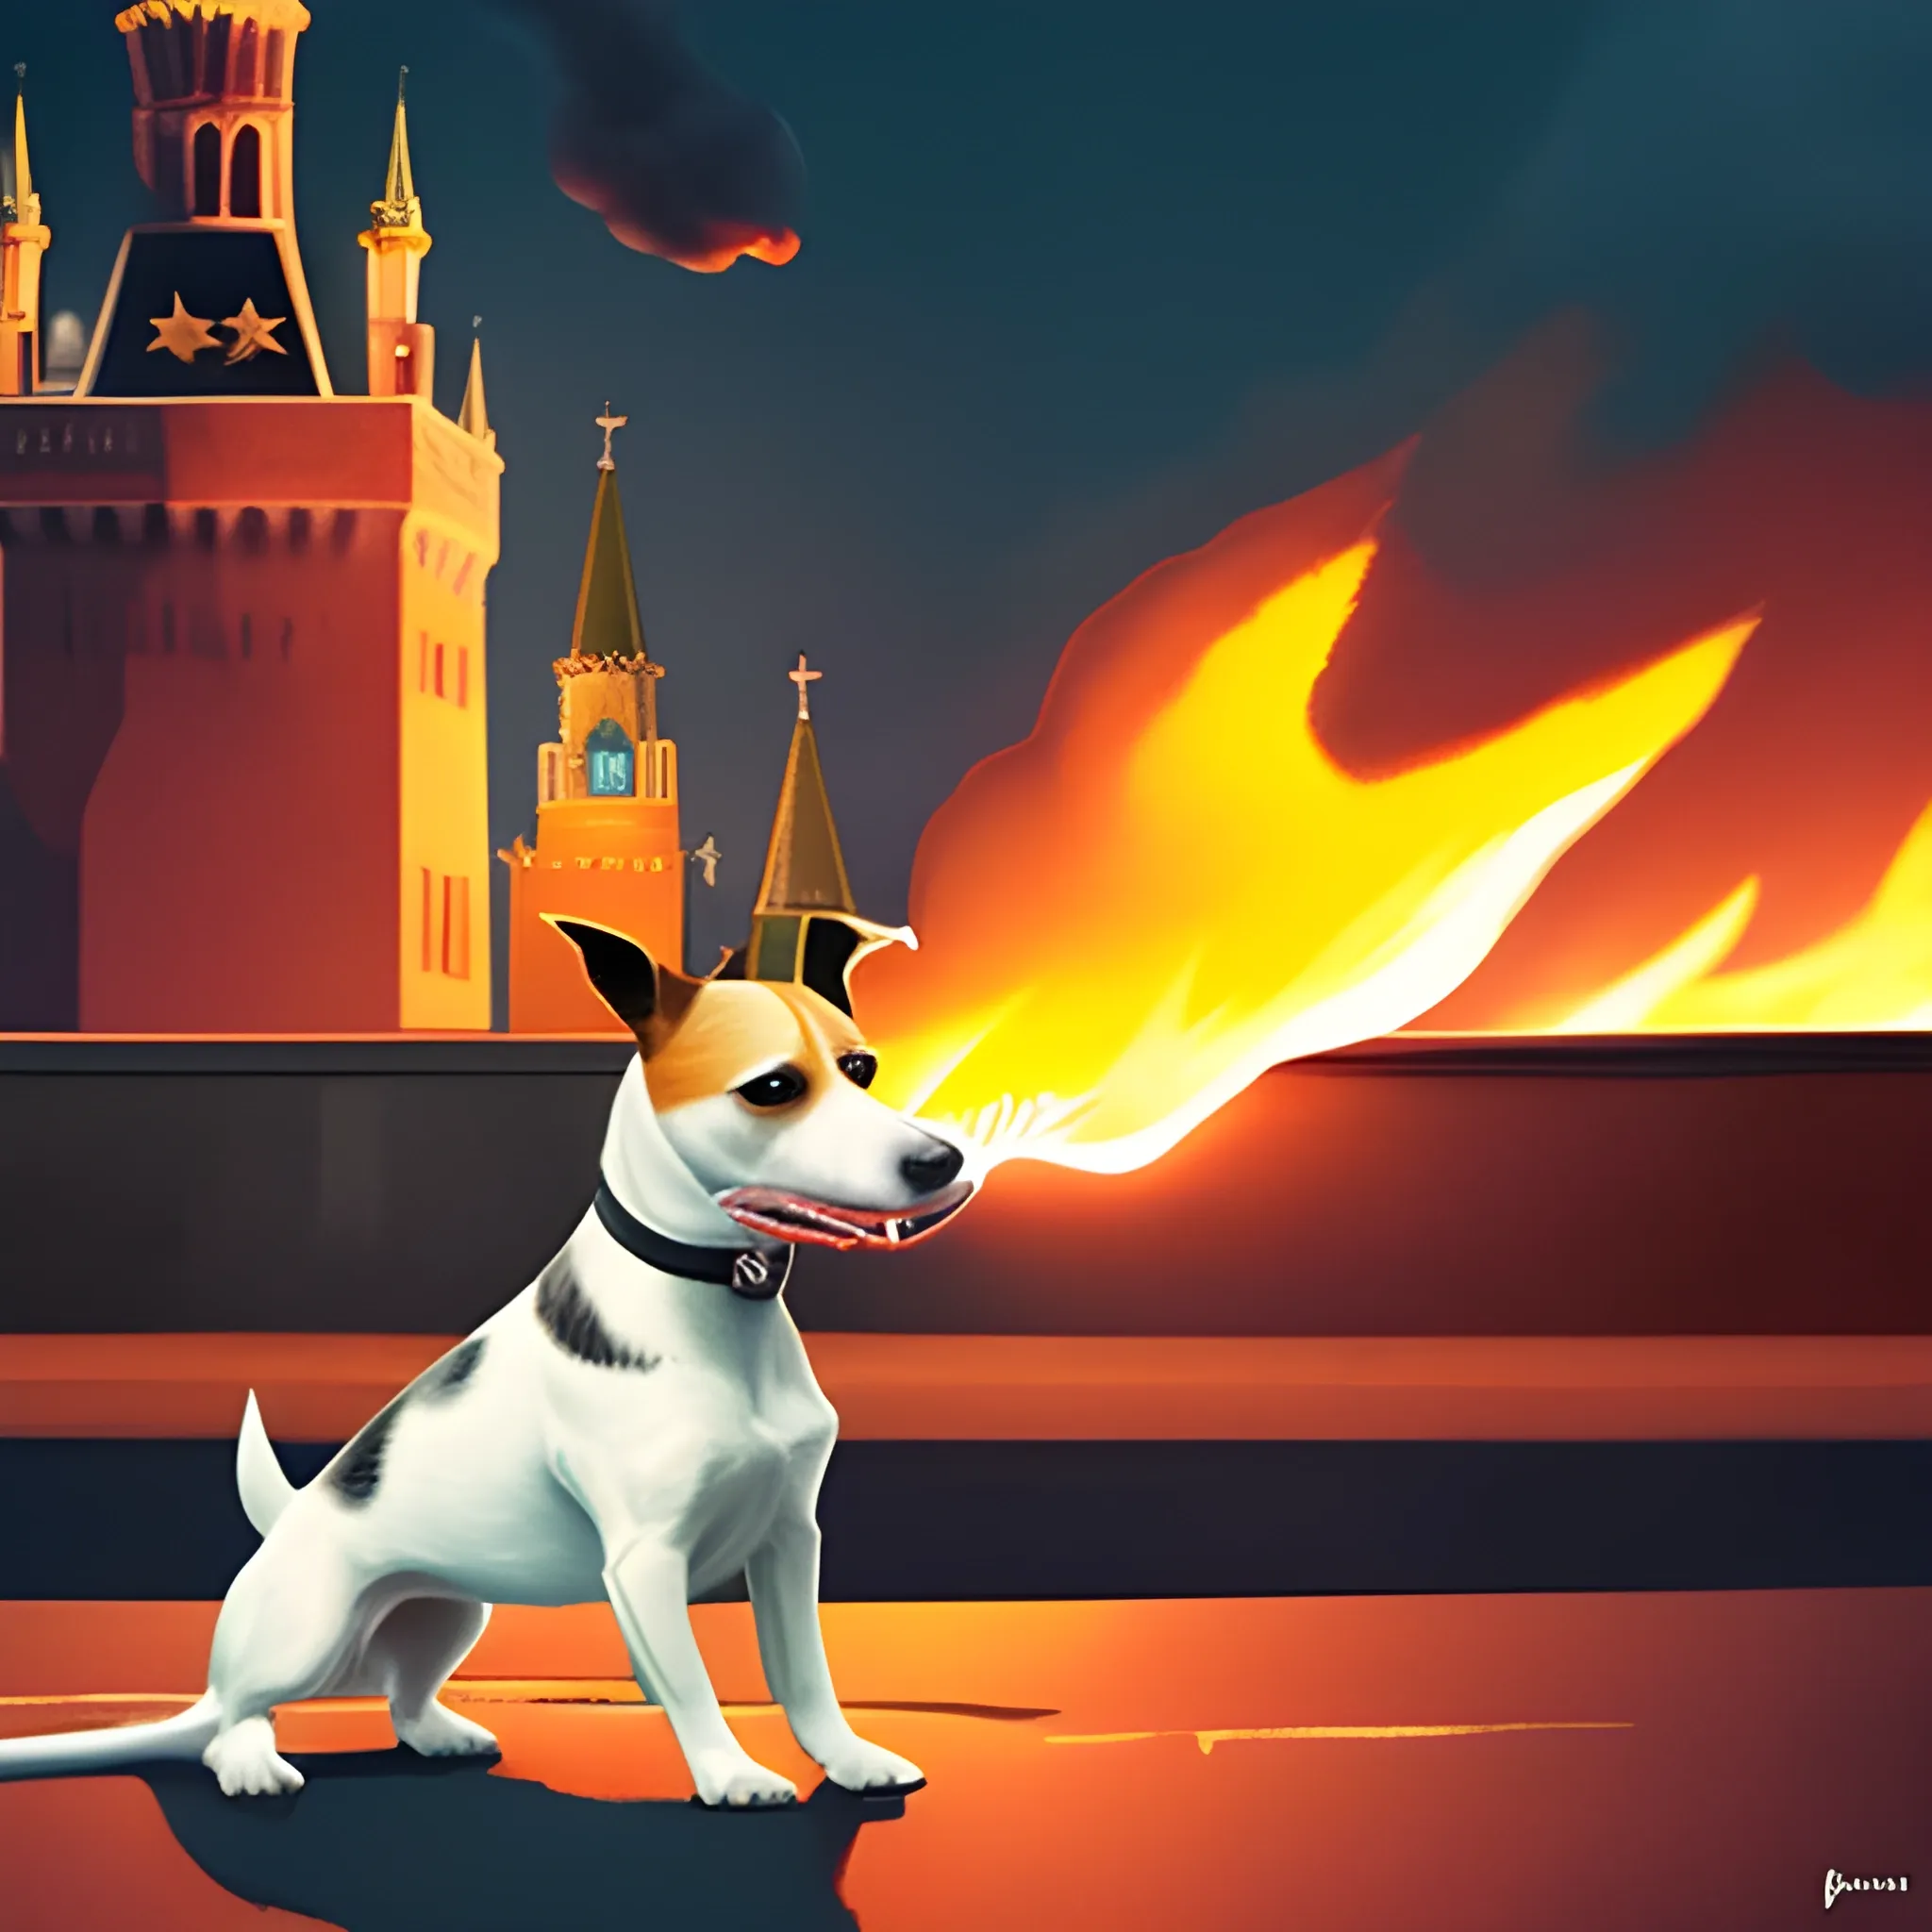 ukrainian jack russel terrier sets the Kremlin on fire, hyperrealistic, camerashot at night, detailed backgound, has molotov coctain in its mouth